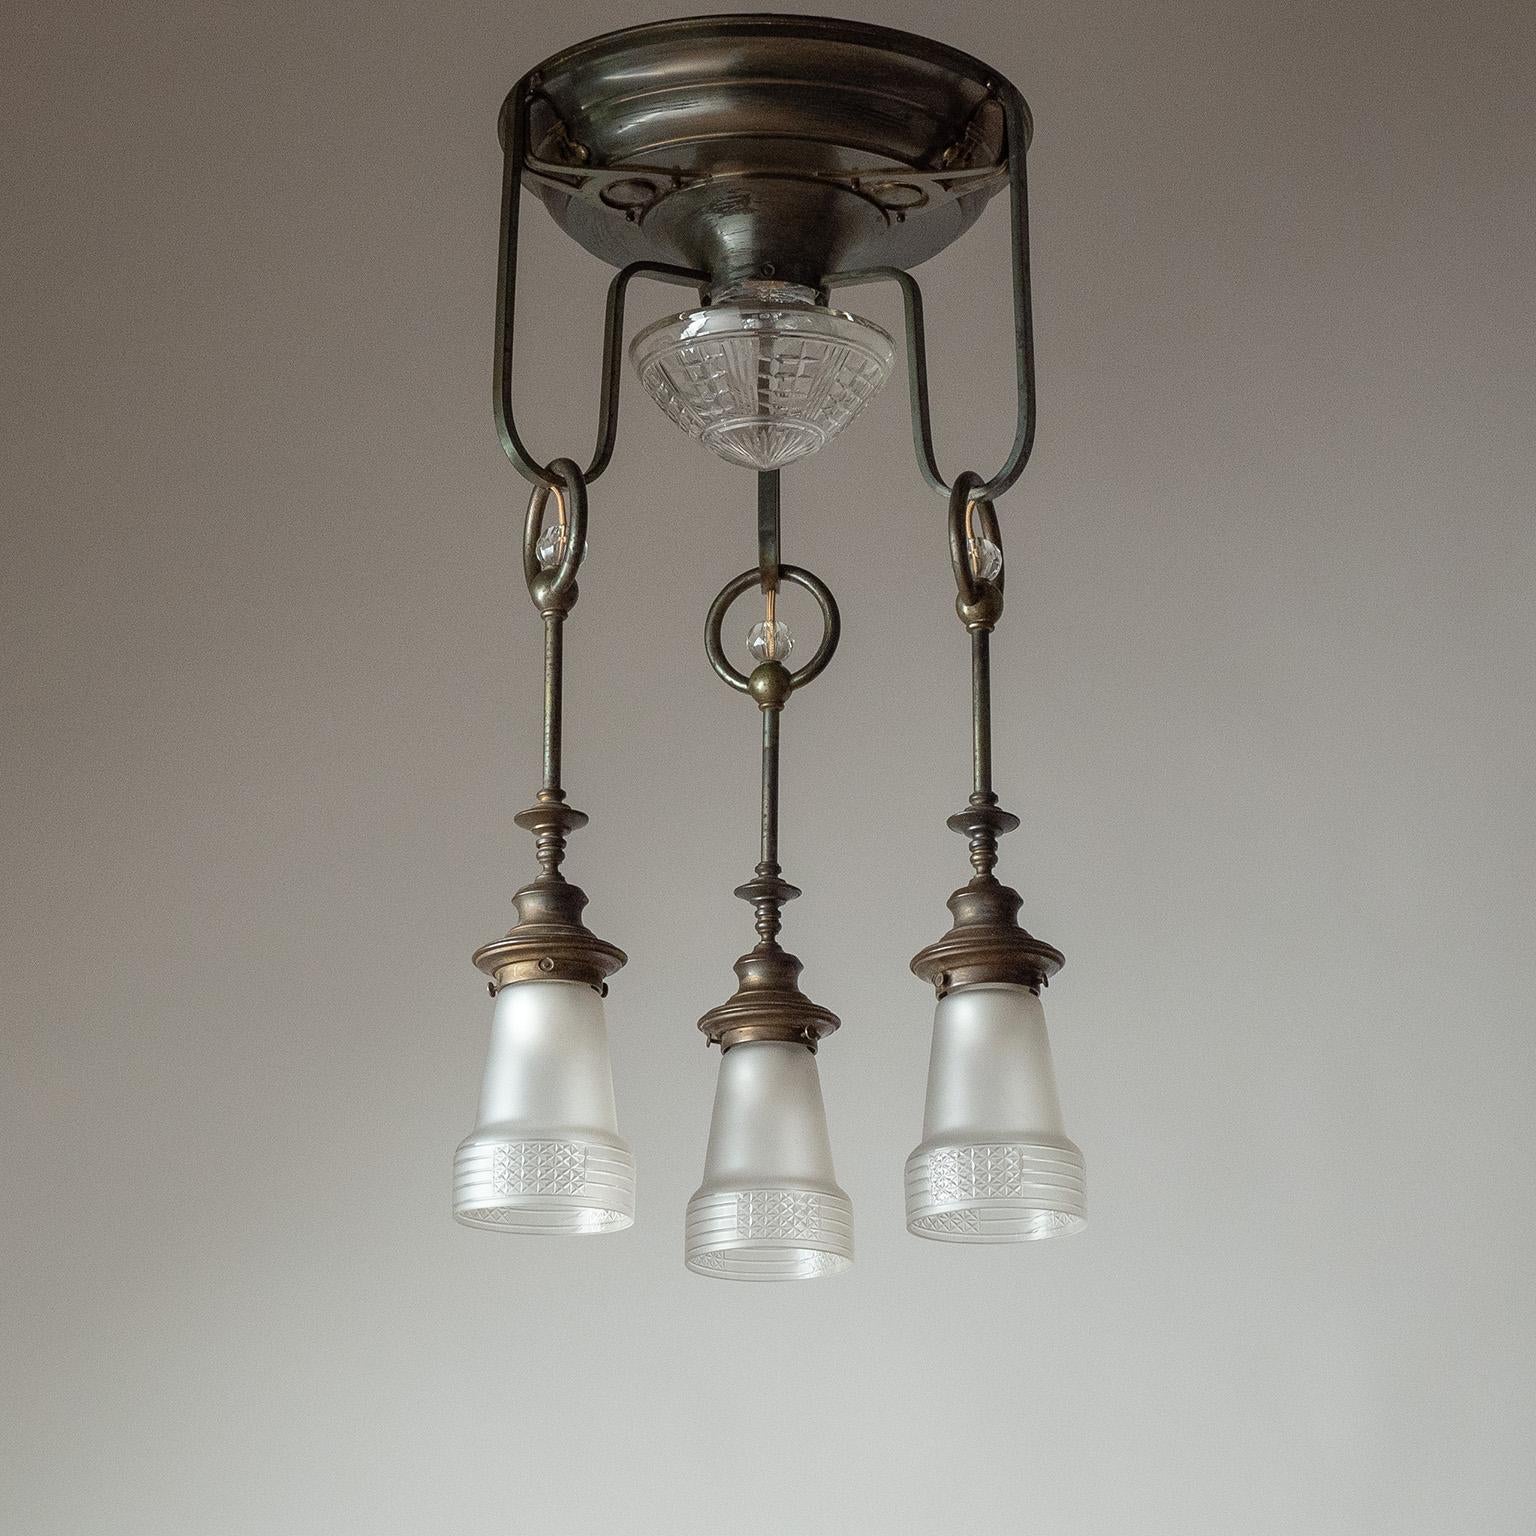 Rare Austrian Jugendstil ceiling light from the early 20th century. Unique brass construction with cut glass diffusers – the central, top one being clear, while the three ‚hanging‘ glasses are acid-etched for a satin finish. All glasses have